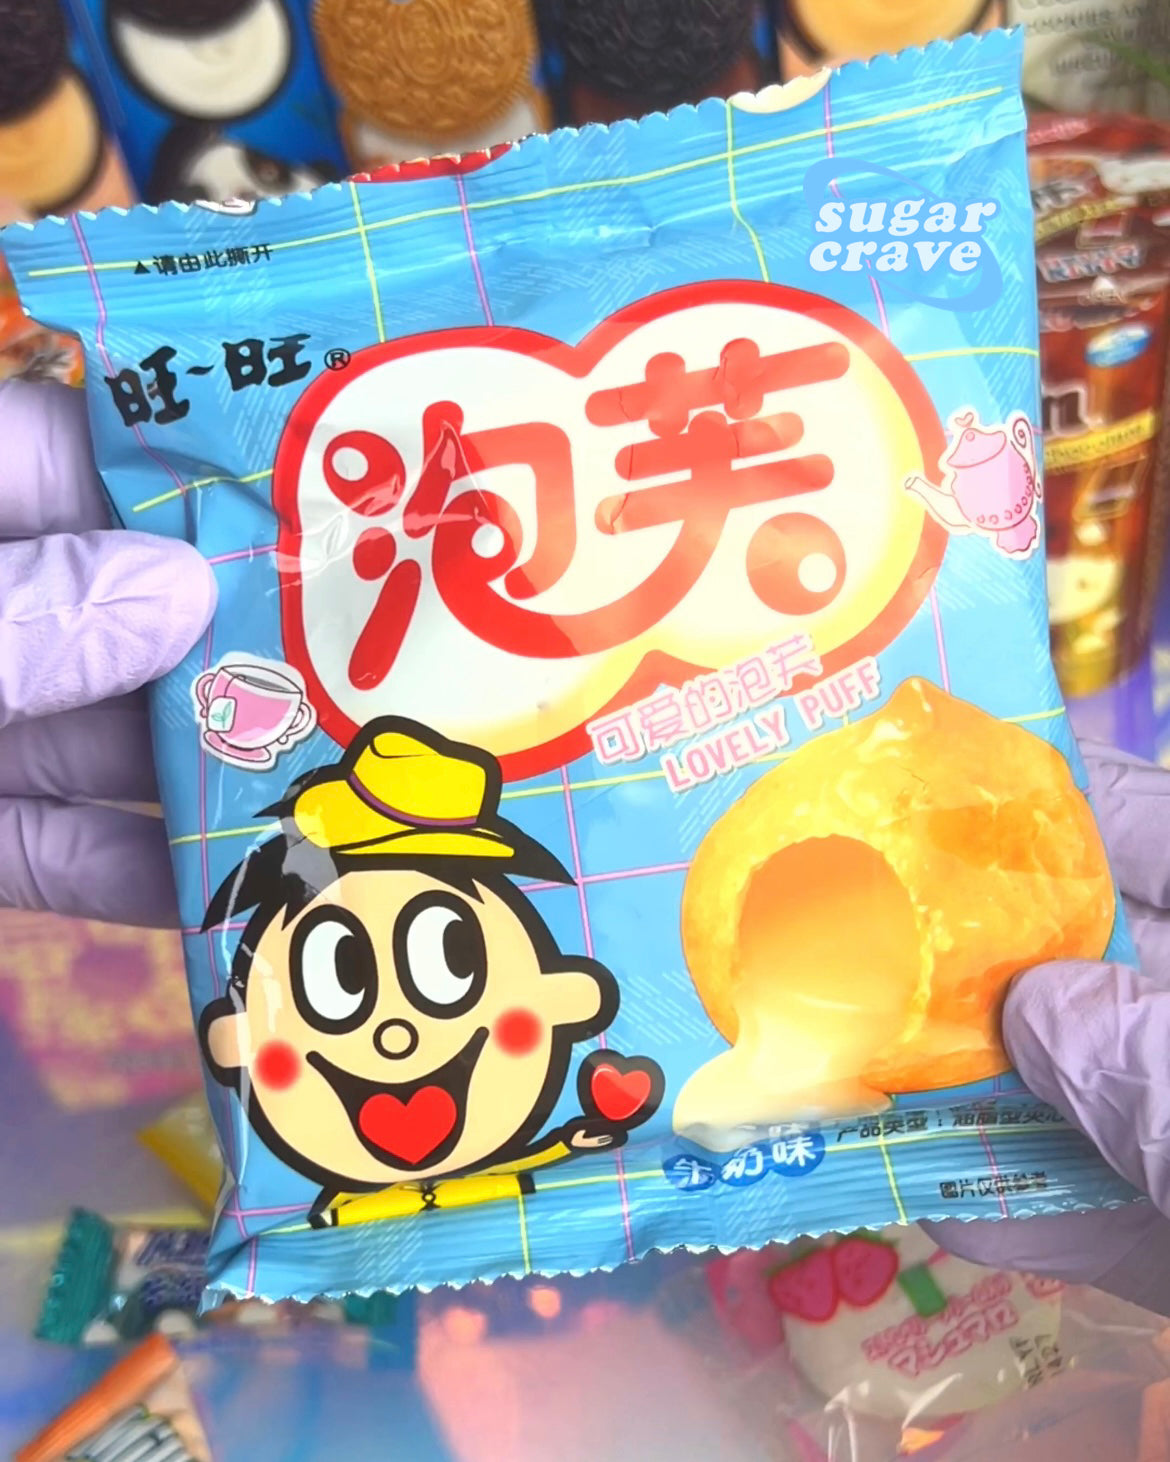 2-Pack Want Want Puffs 🇹🇼